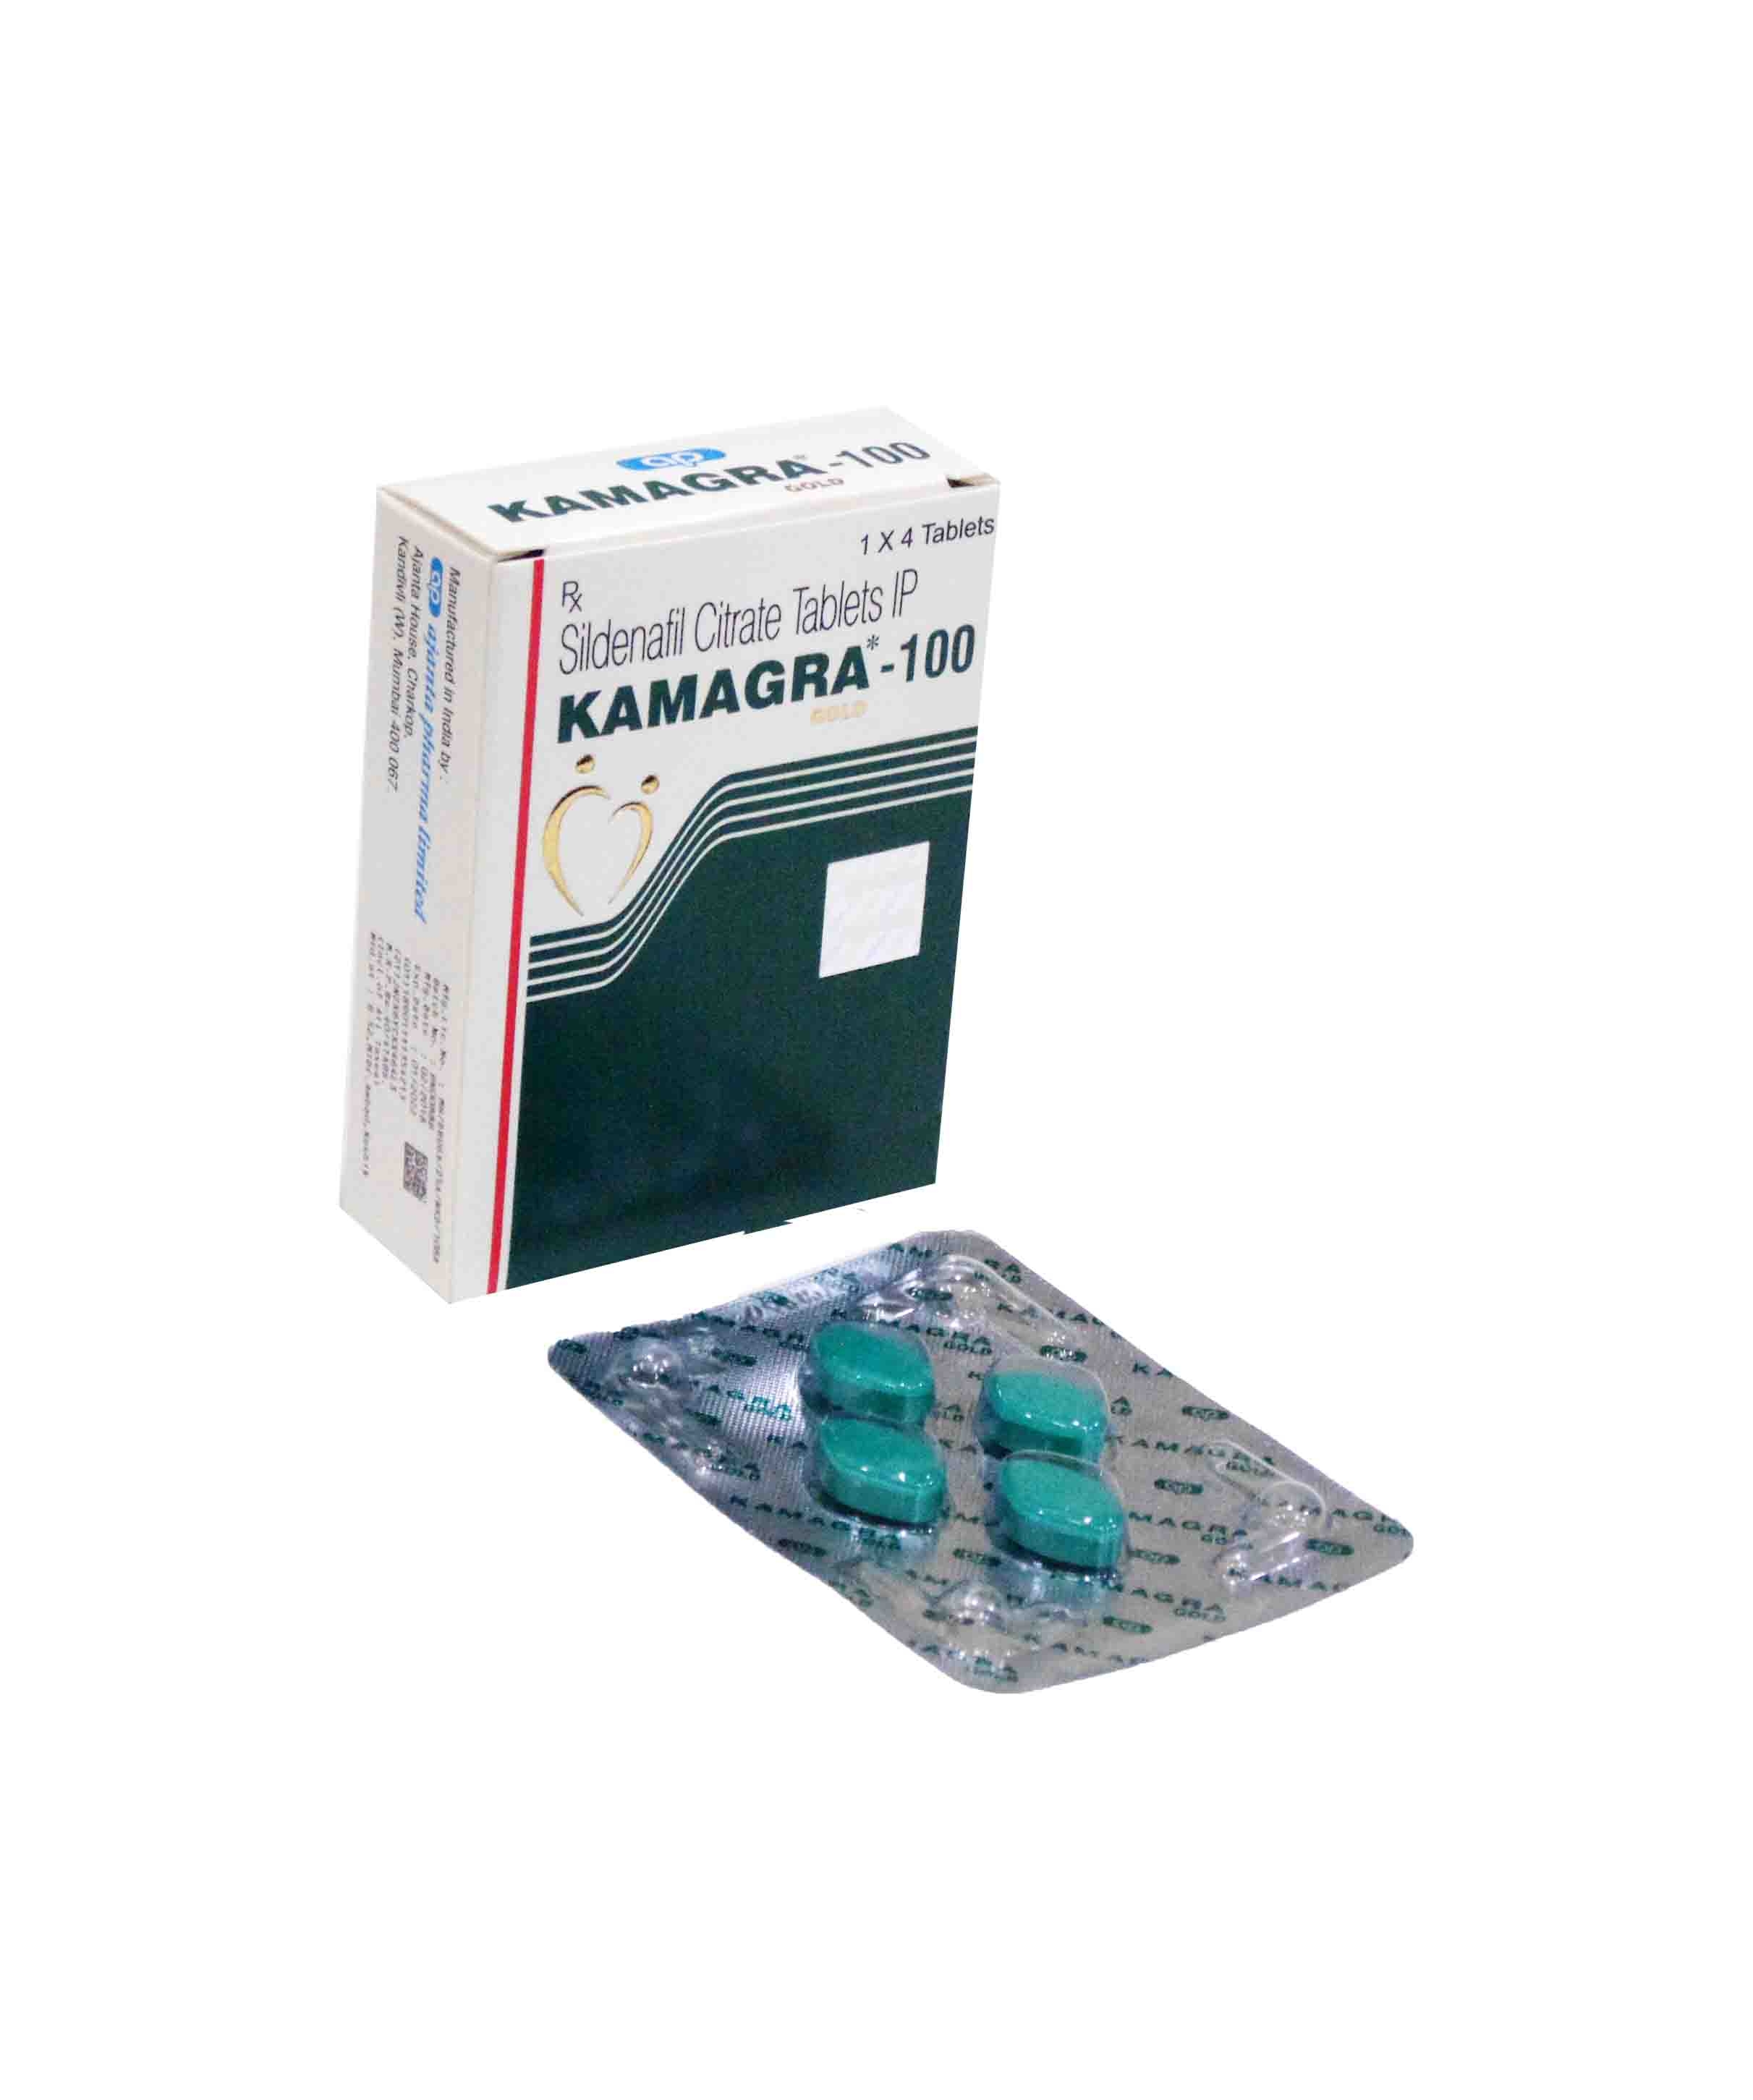 Cheap Kamagra 100 mg Oral Jelly In USA